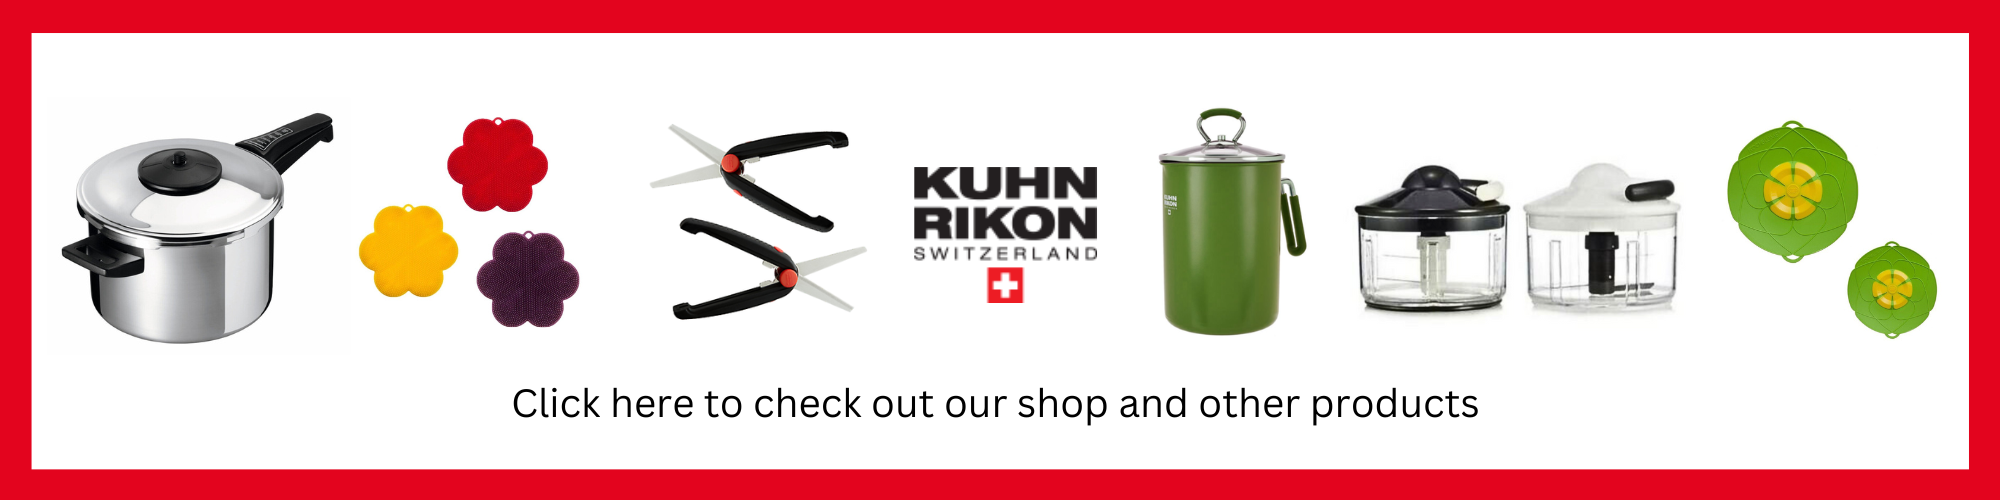 clickable red kuhn rikon home banner